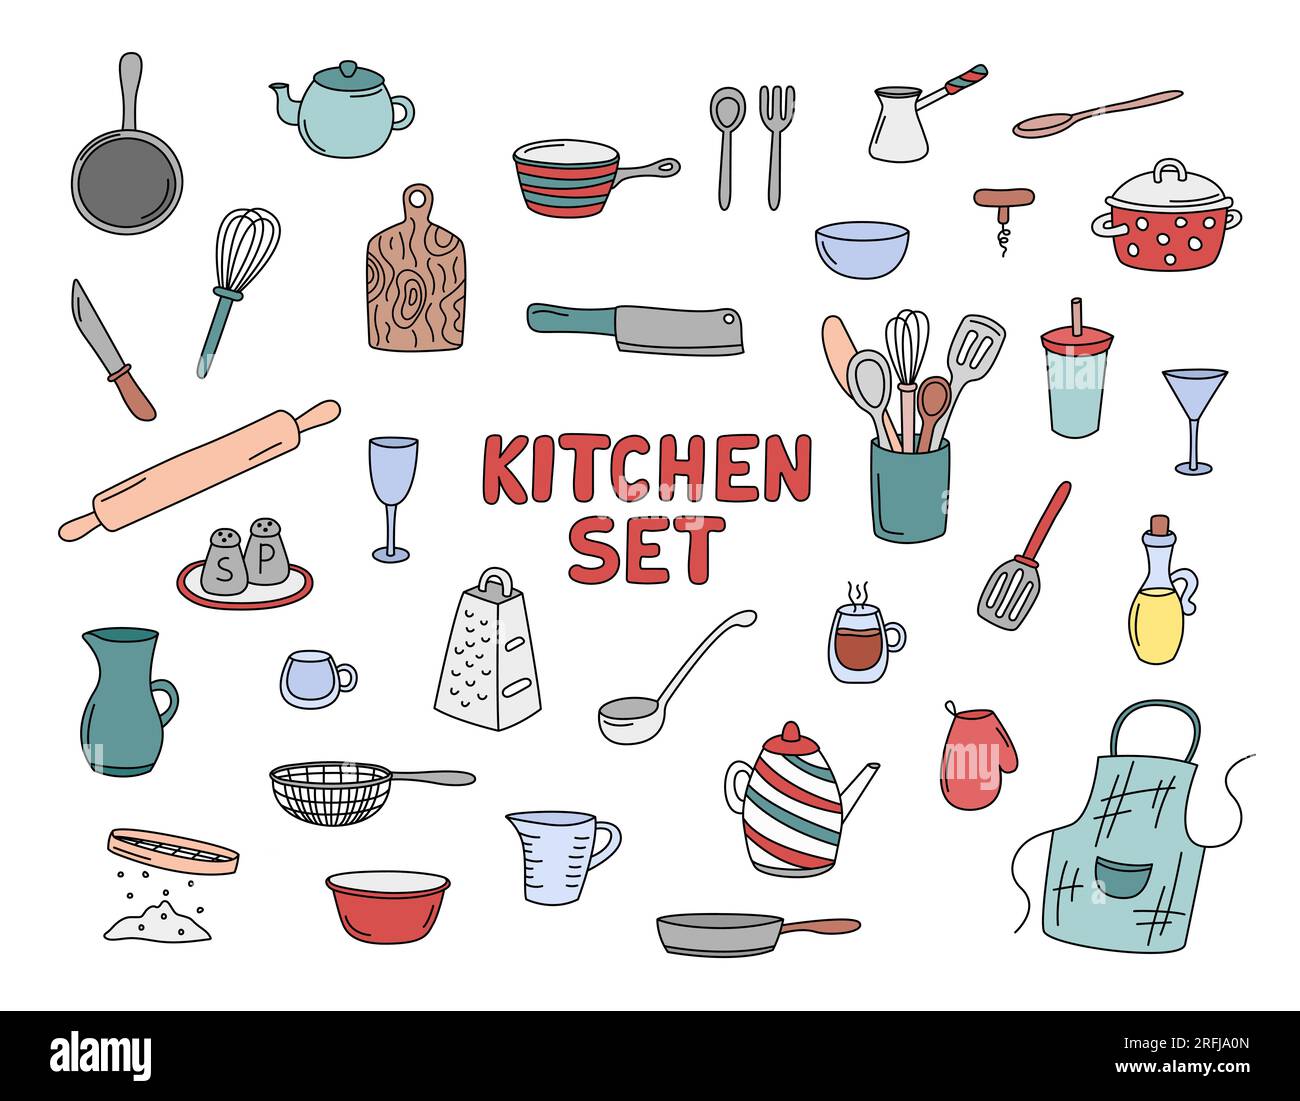 https://c8.alamy.com/comp/2RFJA0N/kitchen-doodles-vector-set-of-isolated-elements-cute-doodle-illustrations-collection-of-cooking-utensils-hand-drawn-kitchenware-for-home-colorful-2RFJA0N.jpg